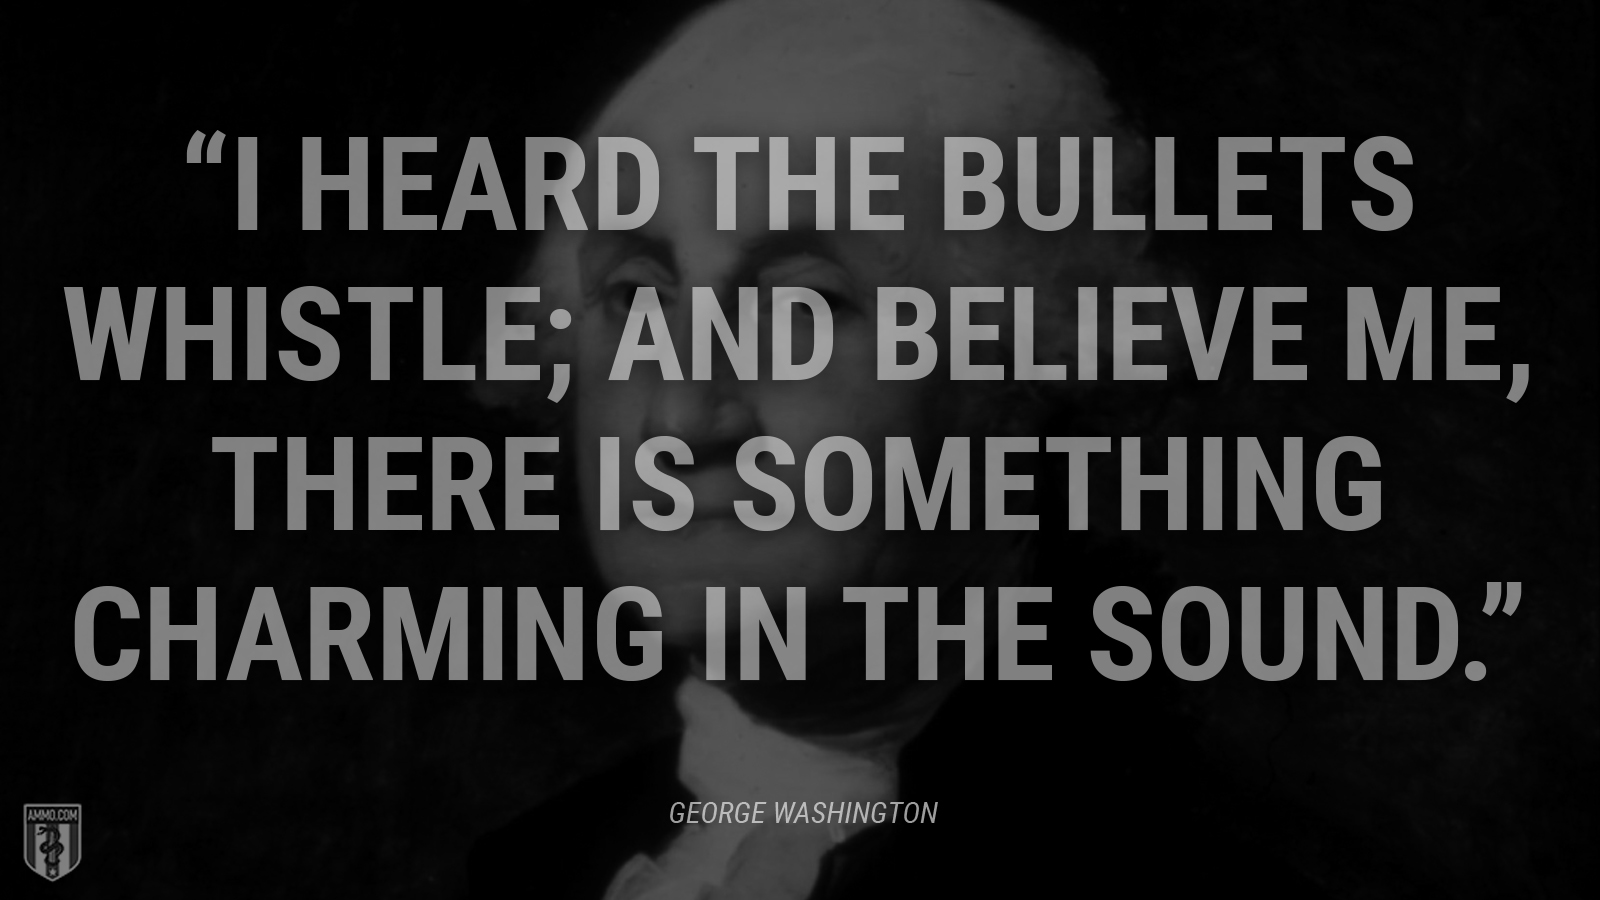 “I heard the bullets whistle; and believe me, there is something charming in the sound.” - George Washington